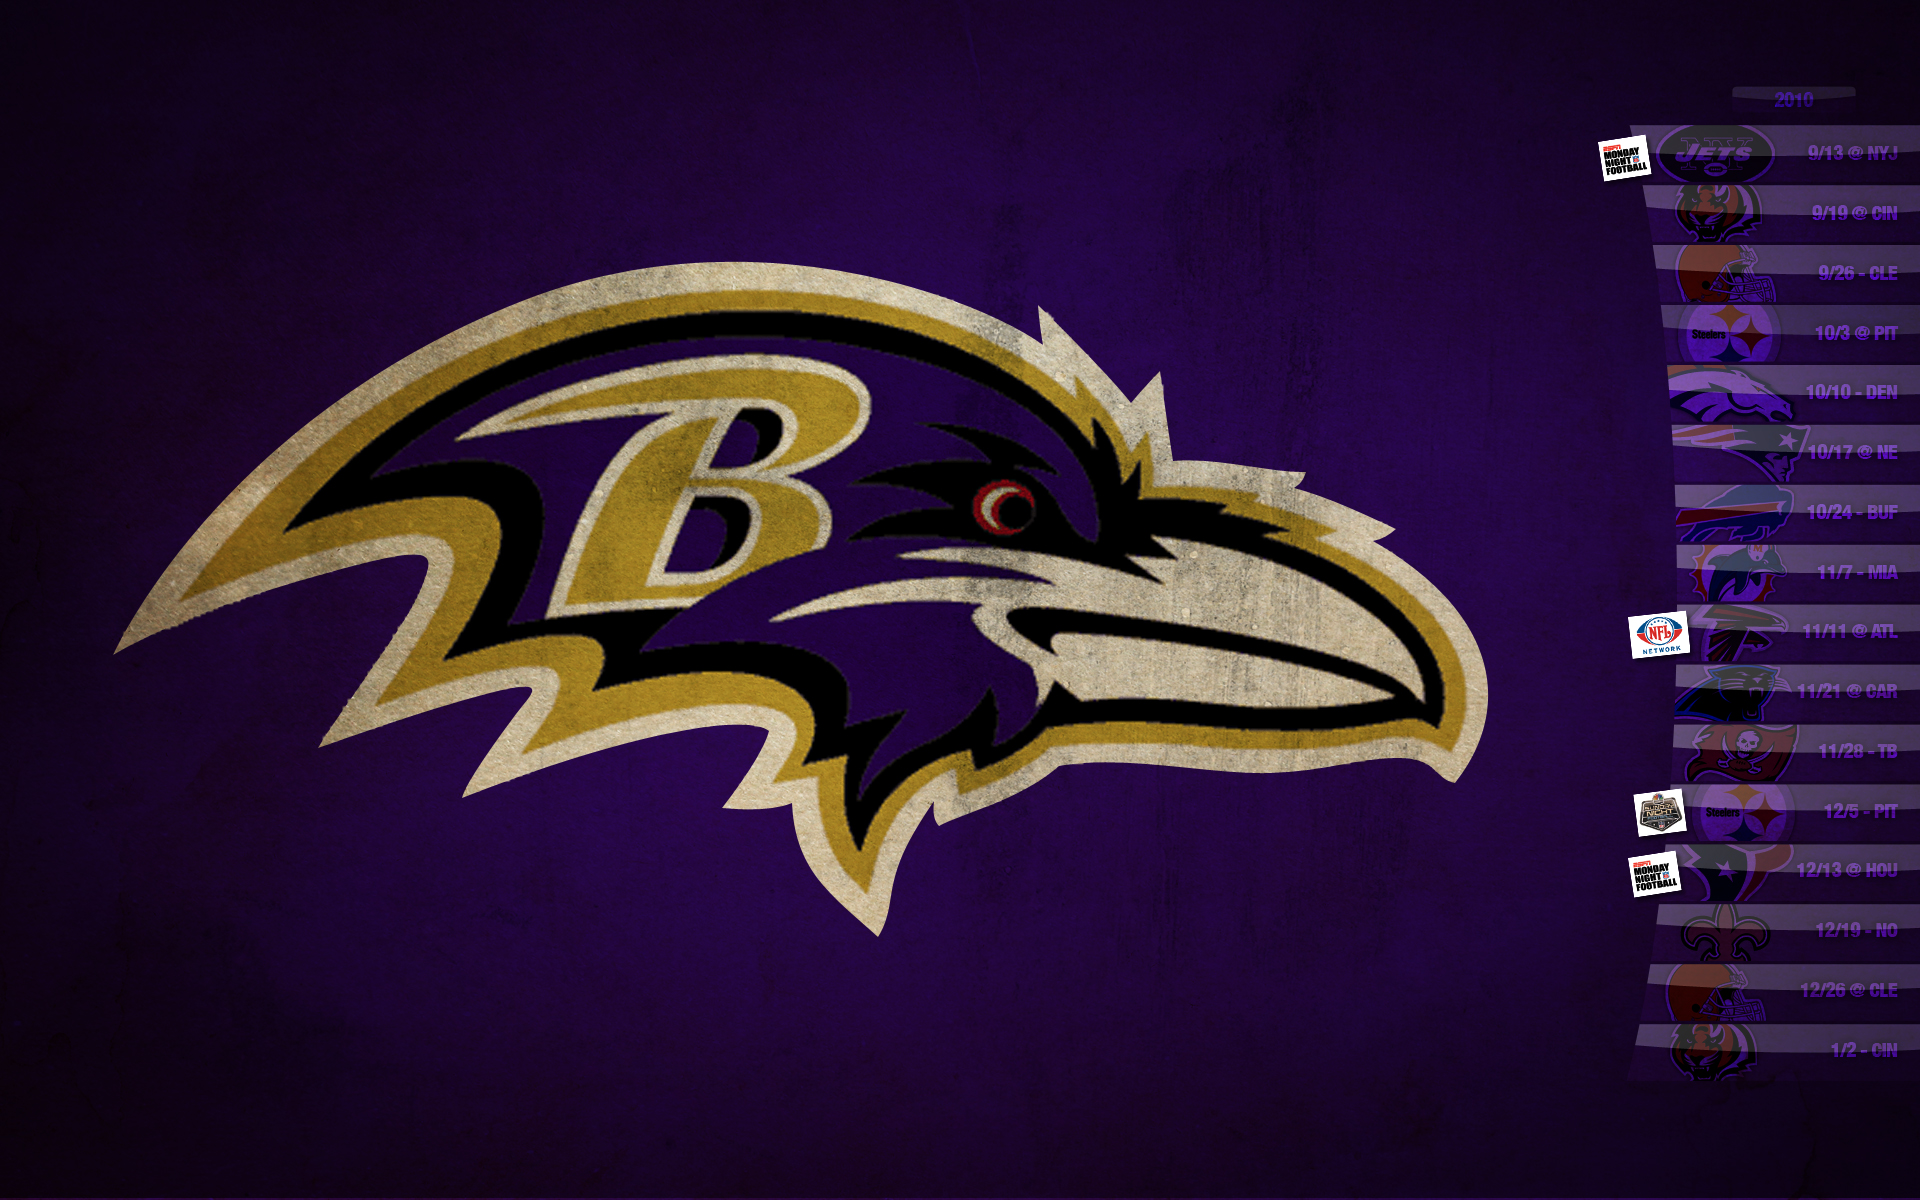 Hope you like this Baltimore Ravens background in high resolution as much as we do! Baltimore Ravens wallpaper